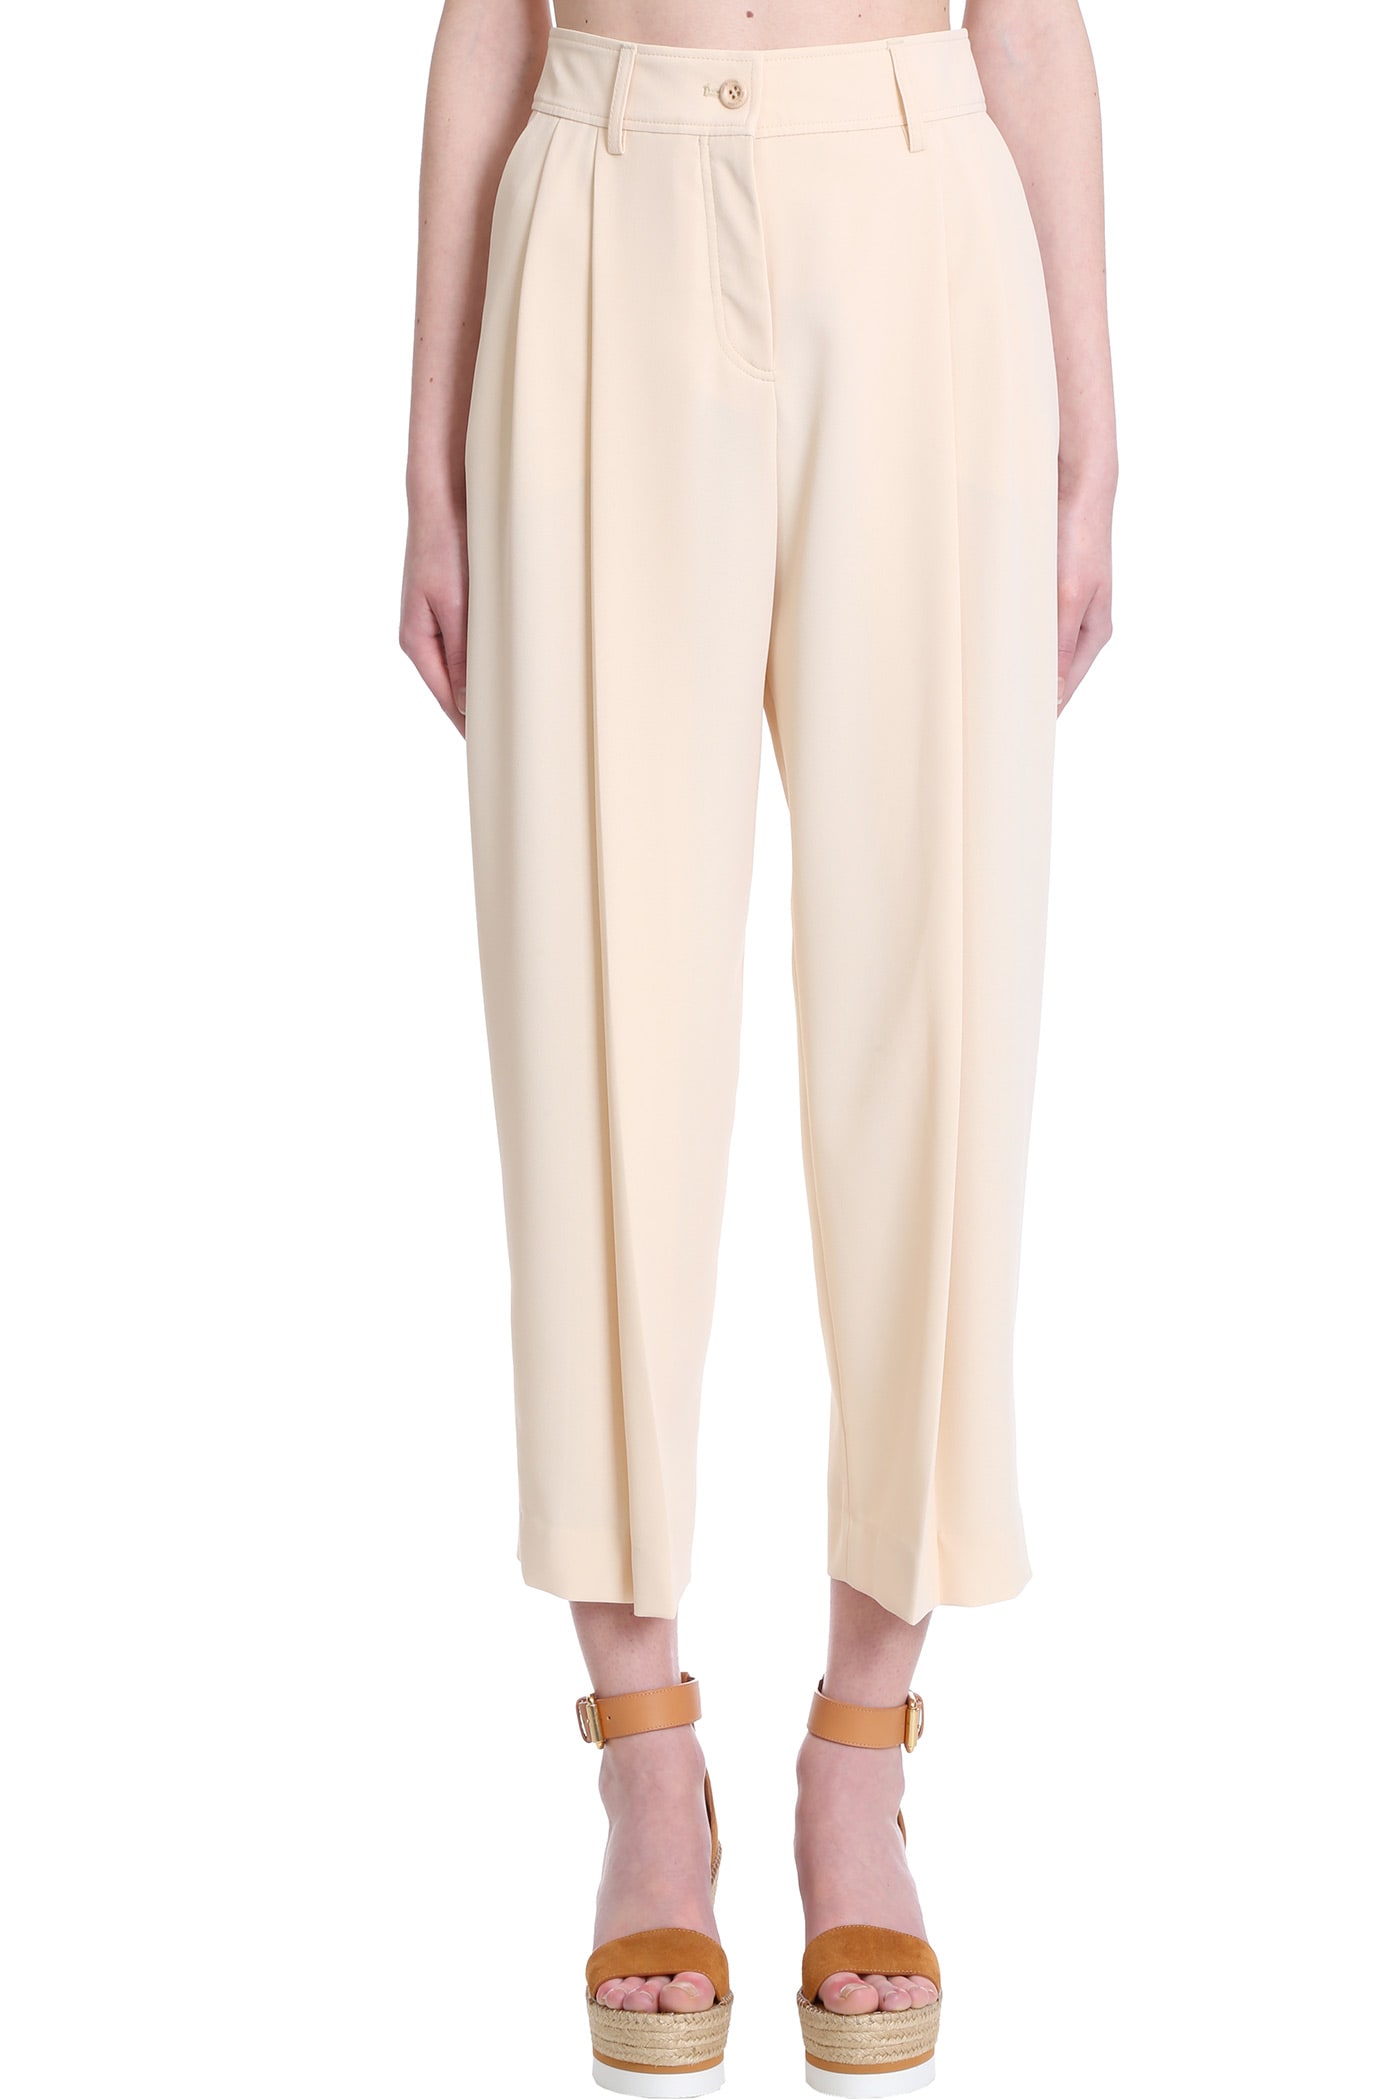 See by Chloé Pants In Beige Rayon